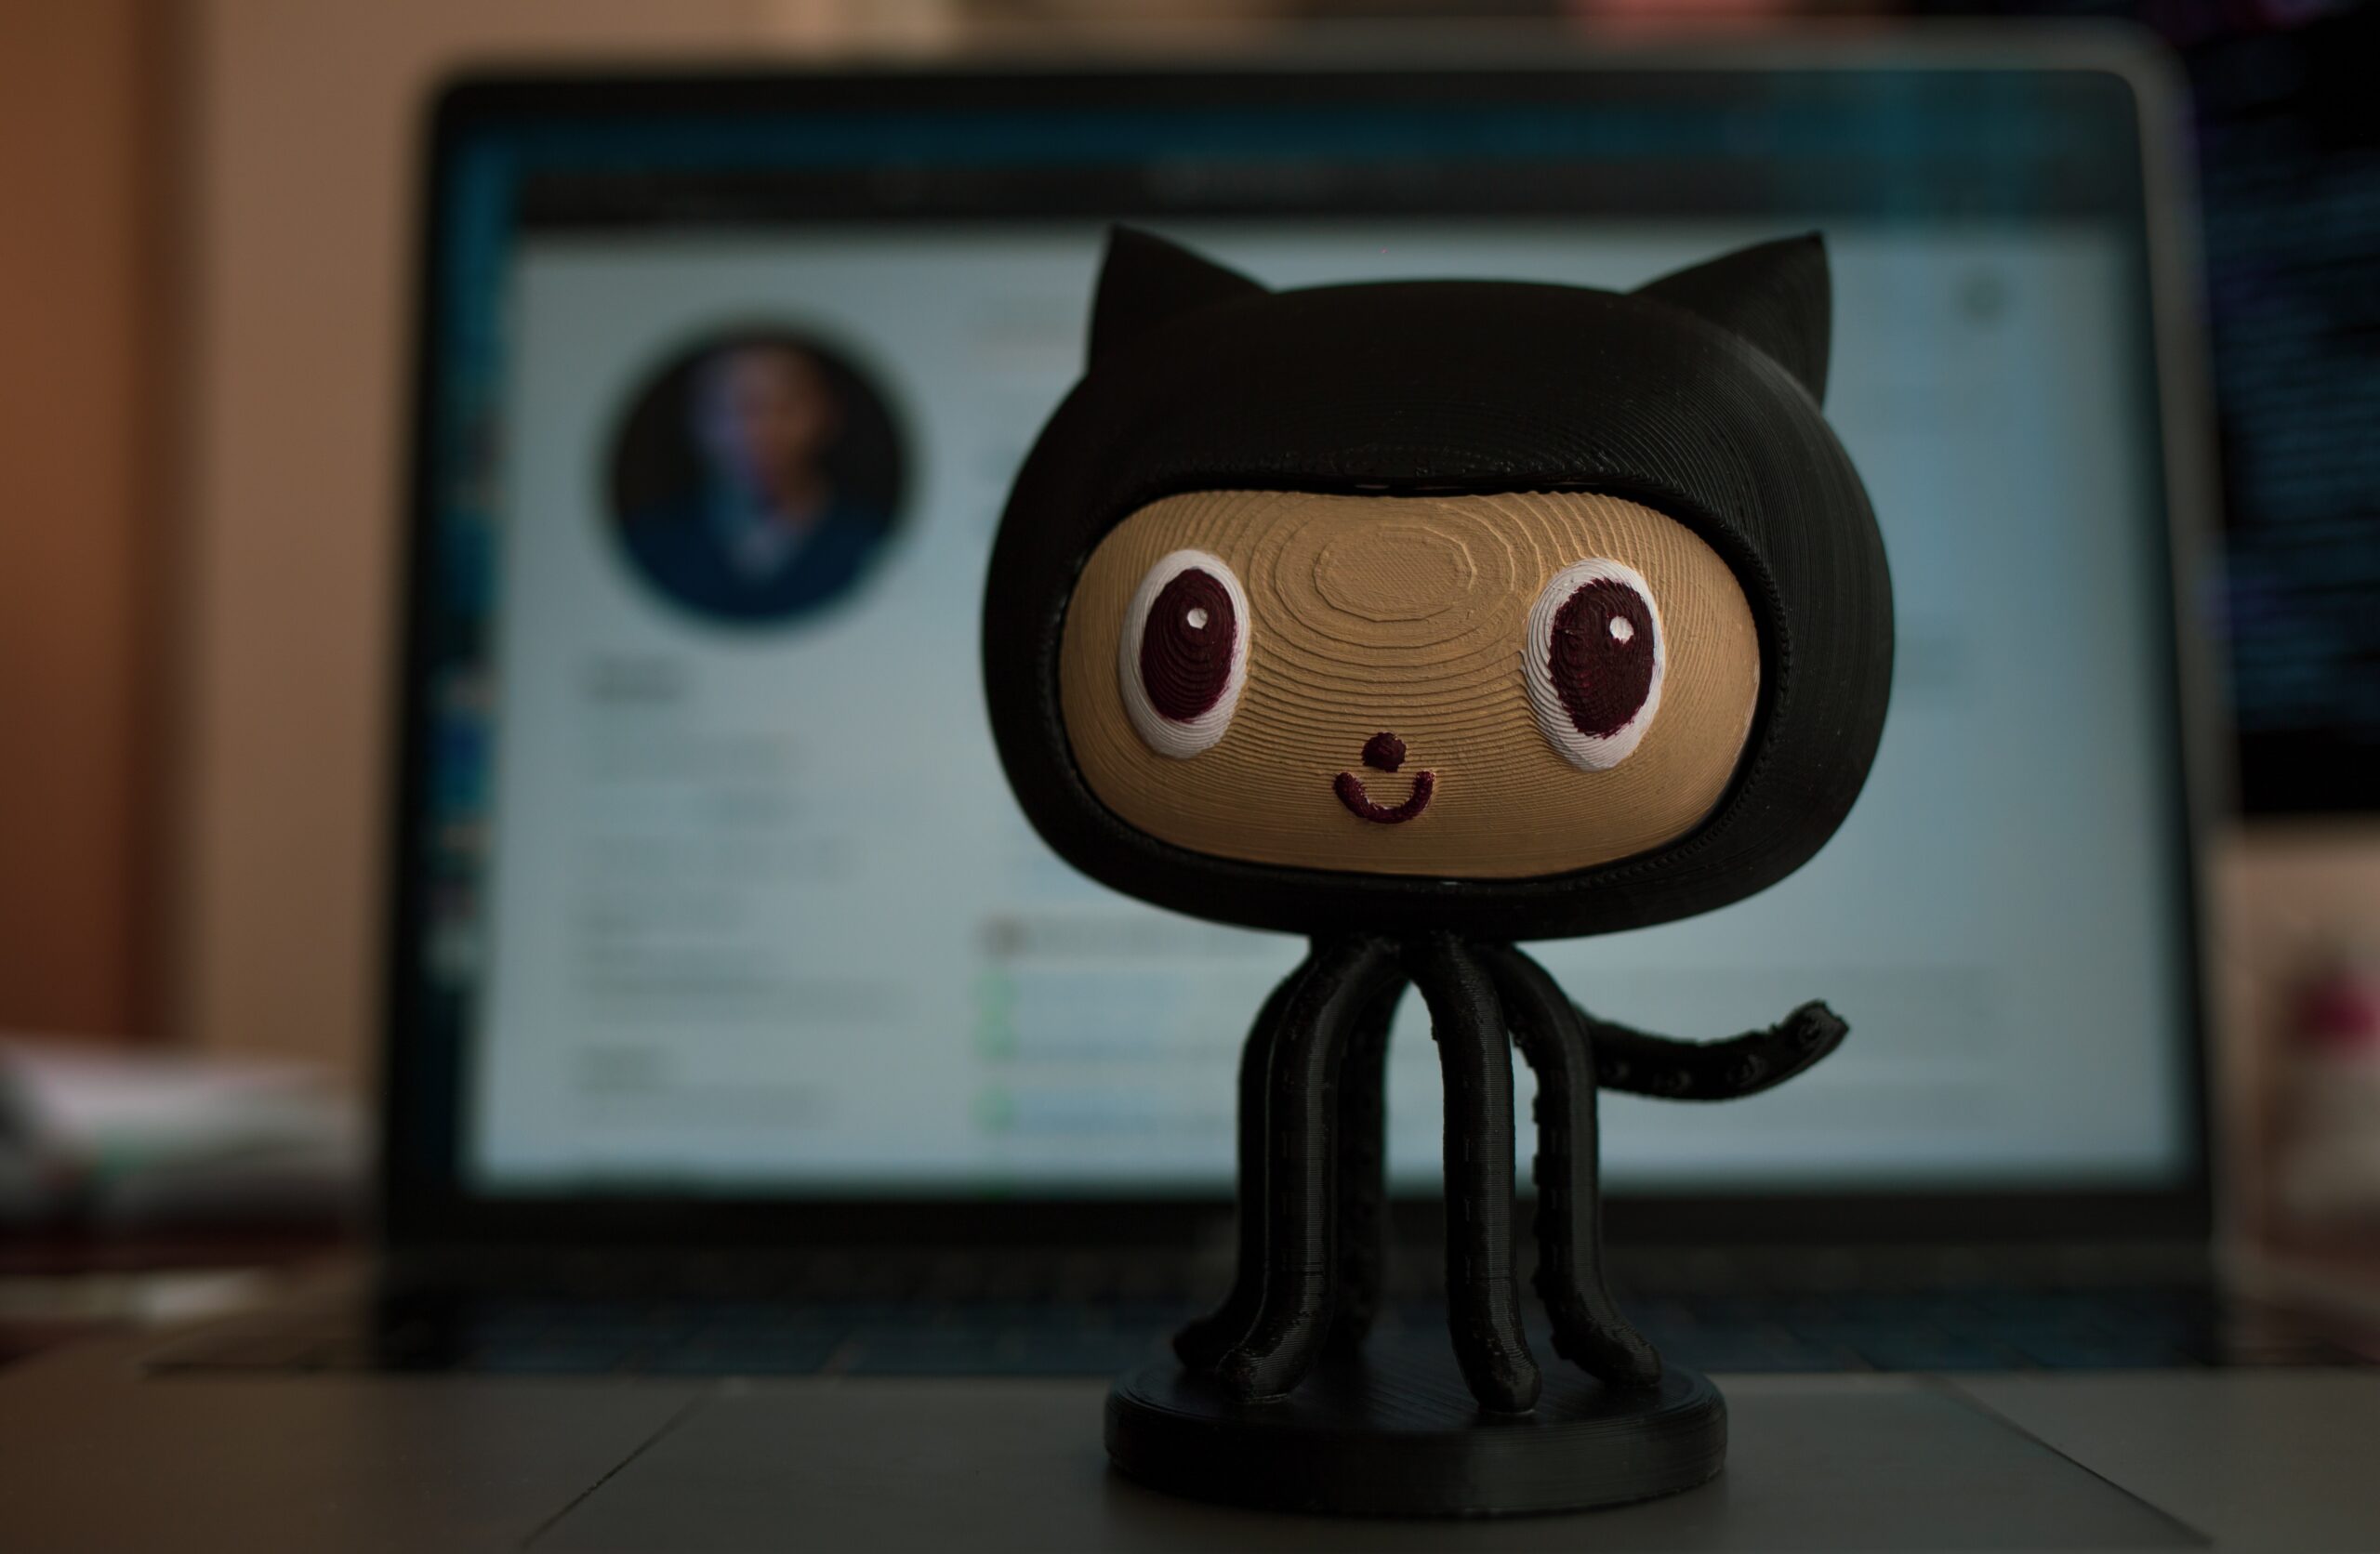 Git on It: Making a Case for GitHub to “Non-Coder” Academics